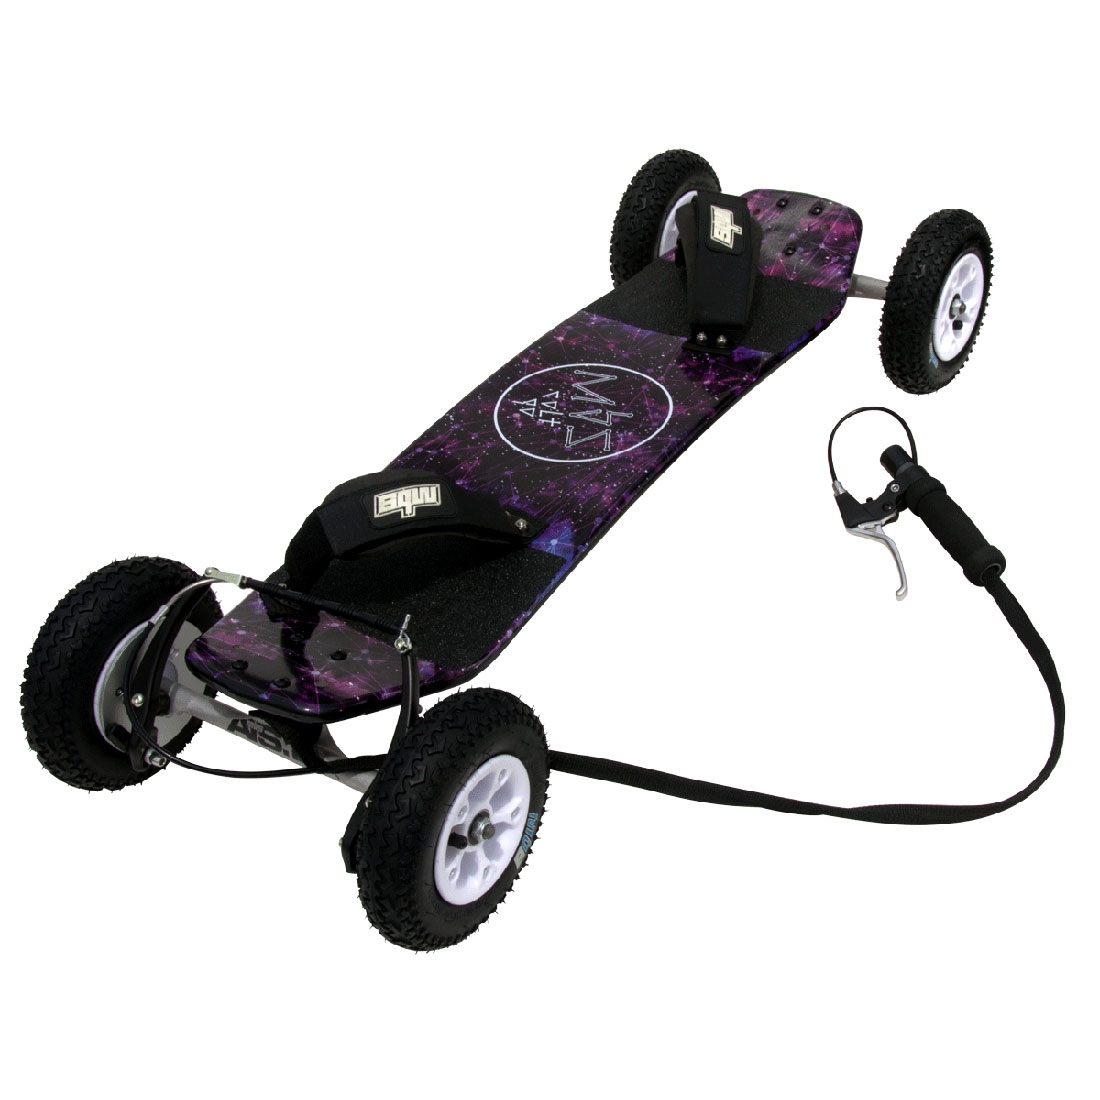 MBS Colt 90X Mountainboard – The Foiling Collective